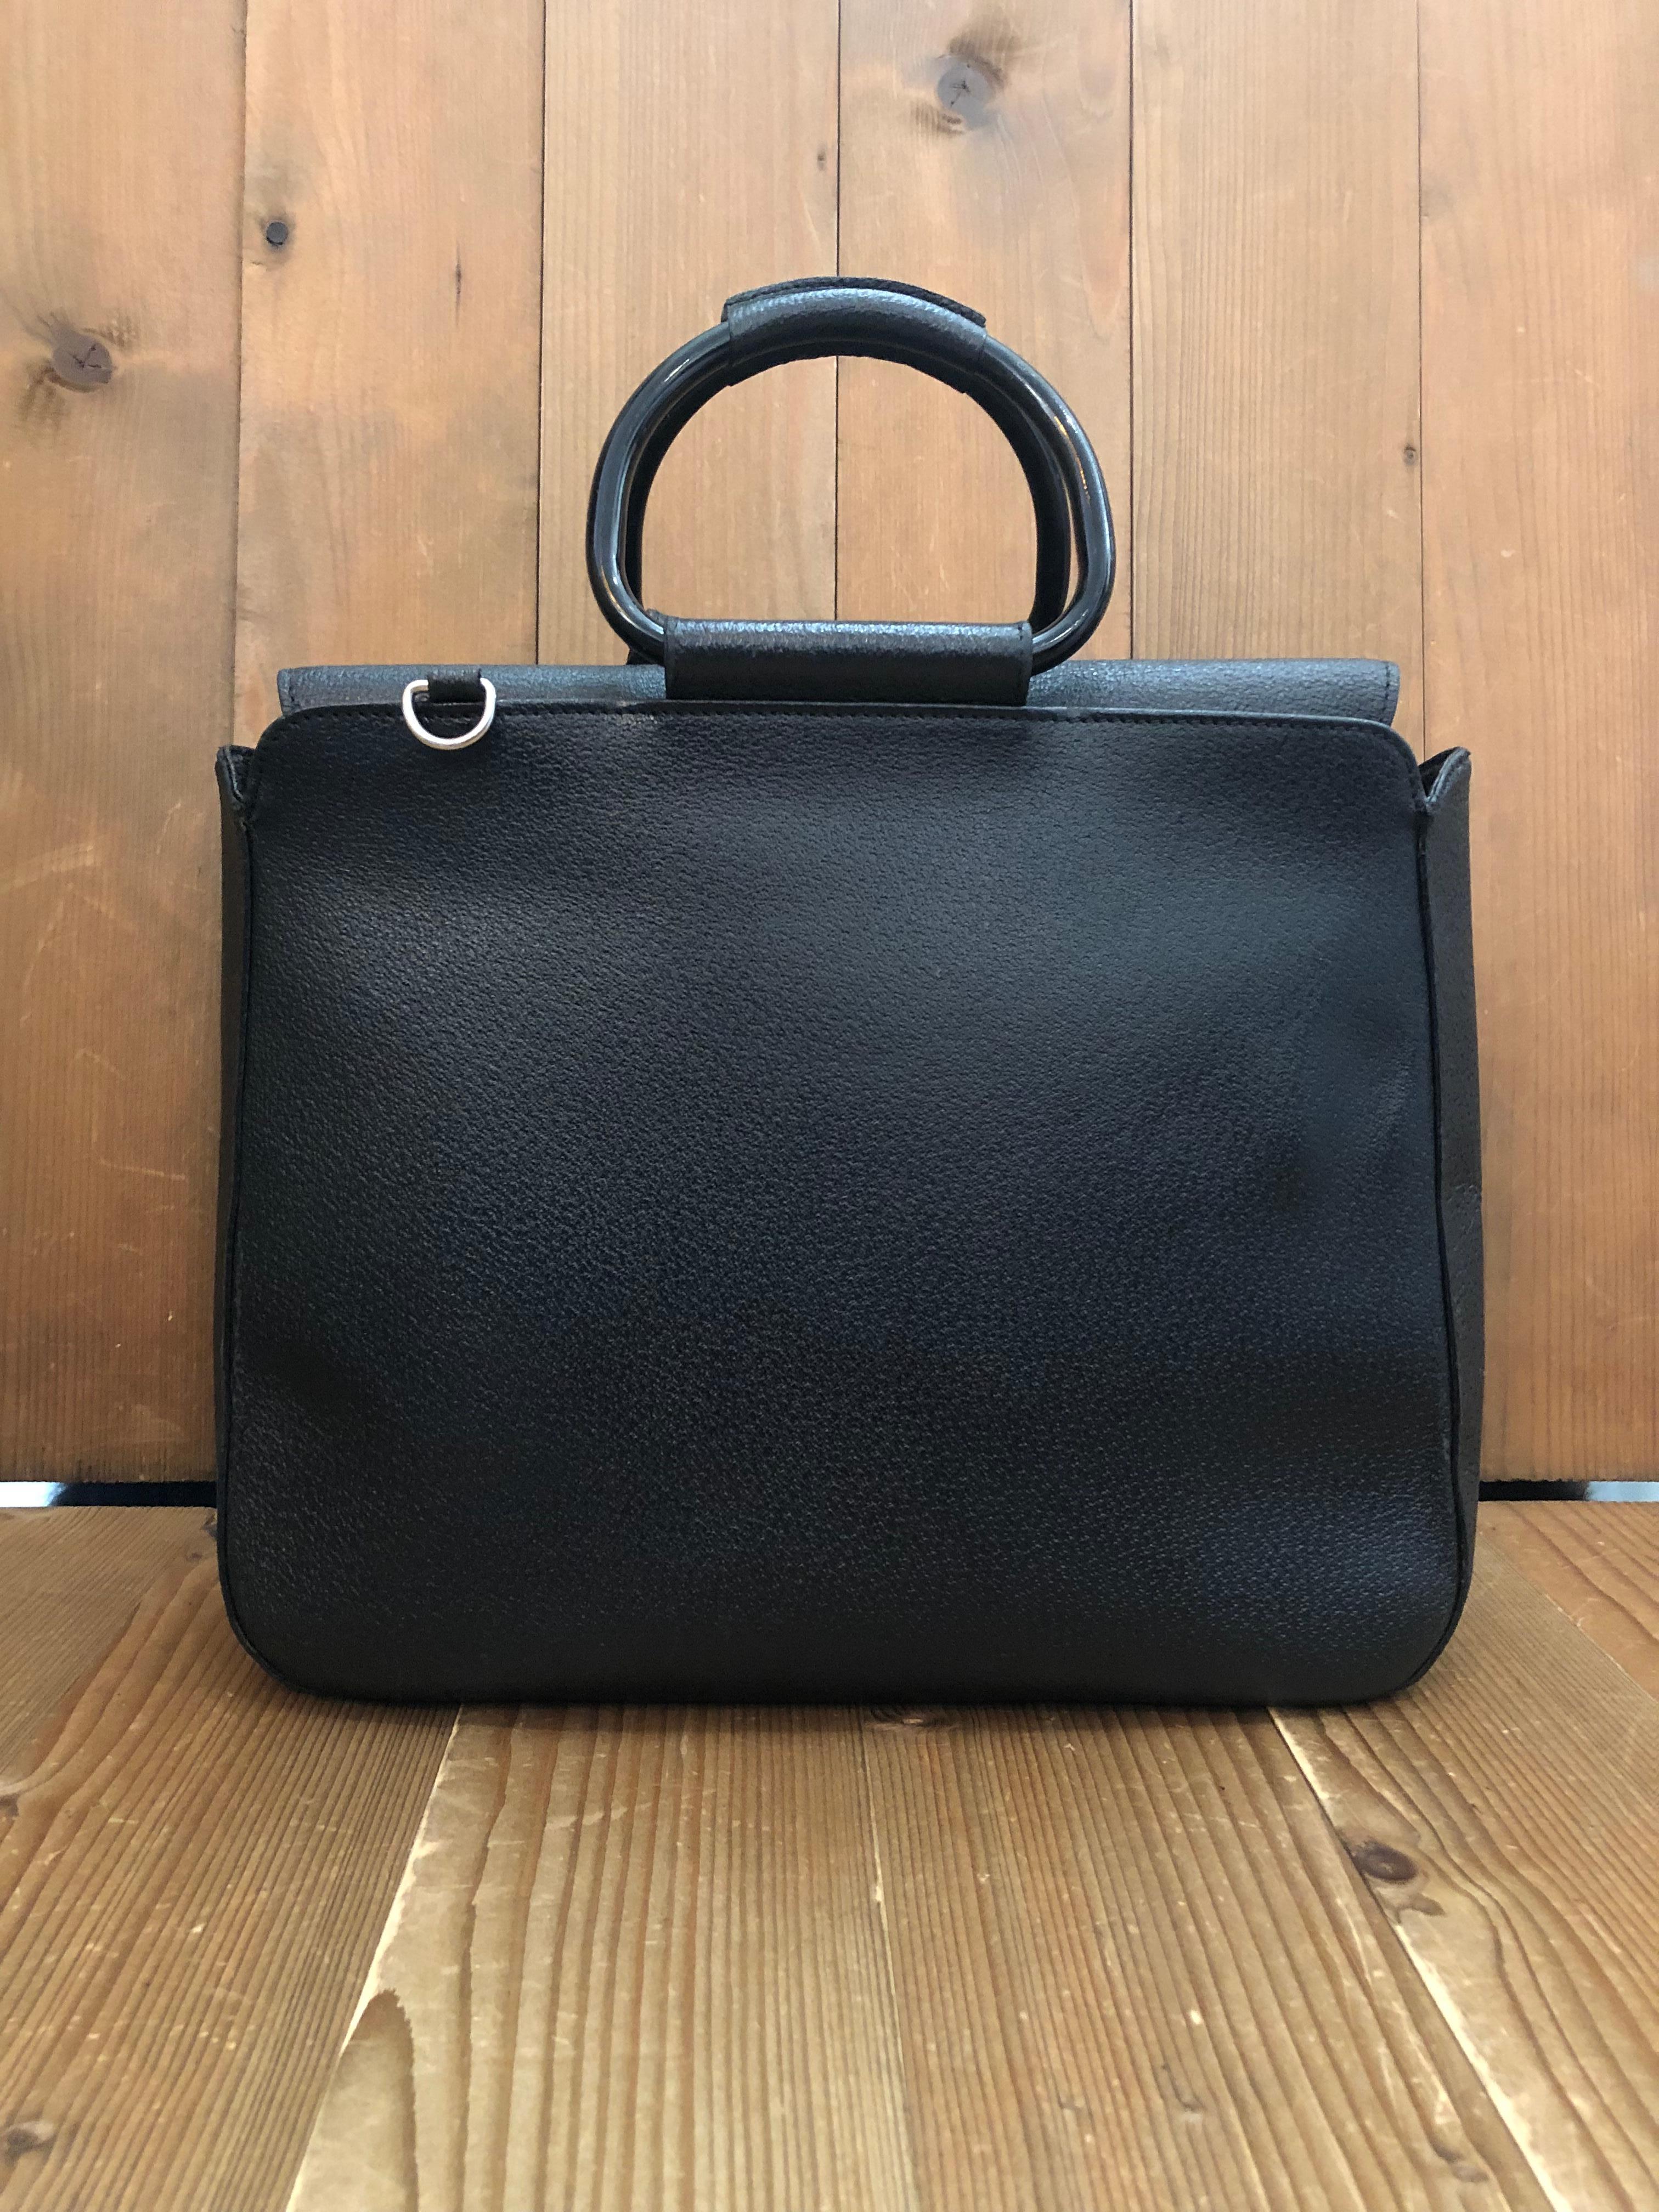 This vintage GUCCI shoulder bag is crafted of pigskin leather in black featuring silver toned hardware and rolled leather metallic handles. Top magnetic snap closure opens to a new coated interior which has been cleaned featuring a zippered pocket.